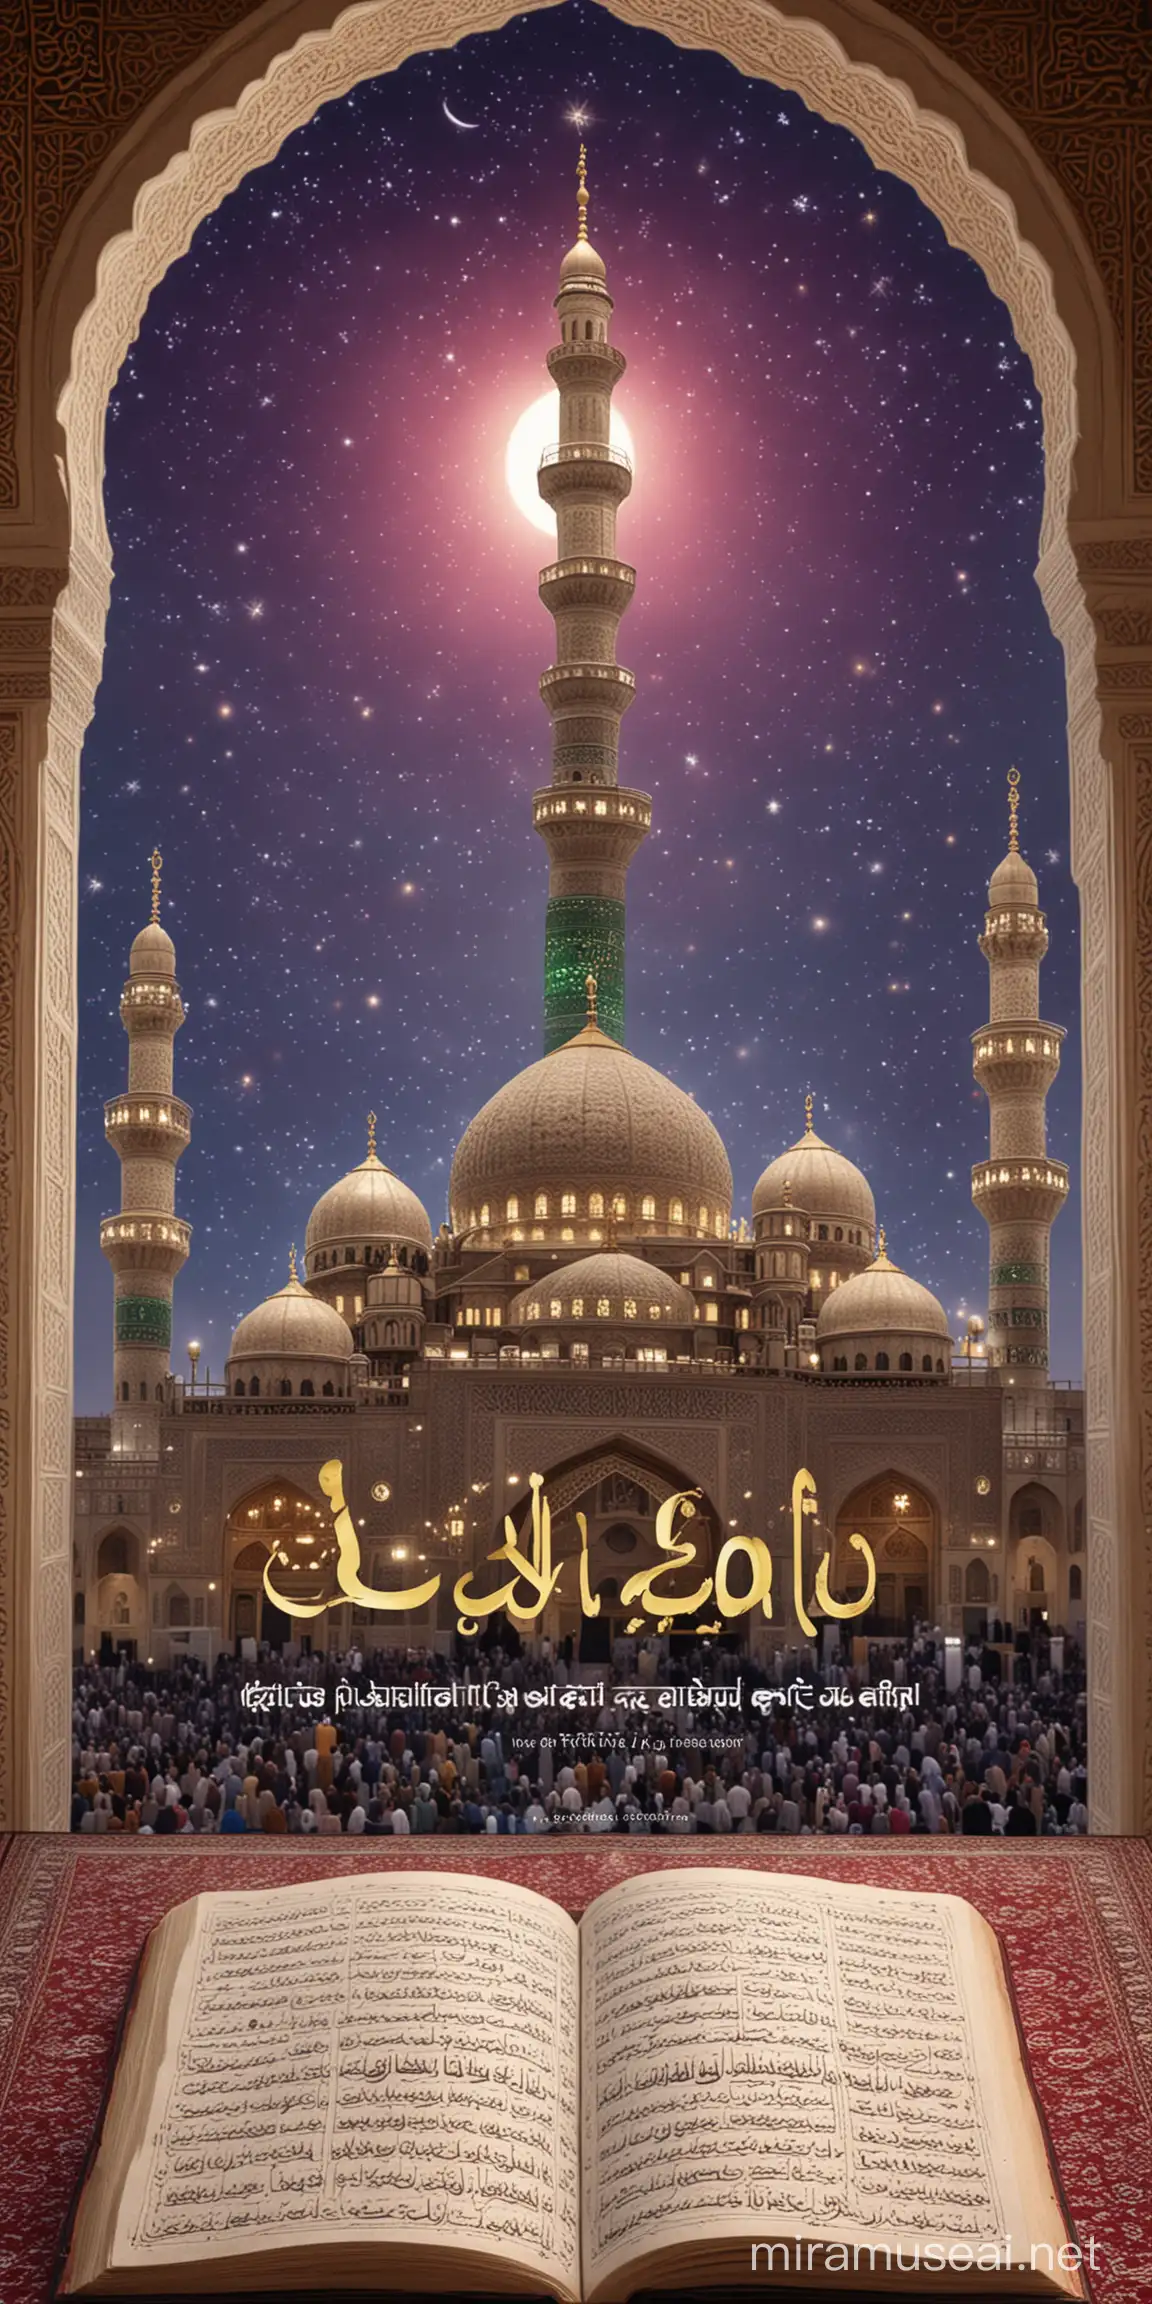 Eid Mubarak Wishes with Quran Quotes and Mosque Silhouette Background